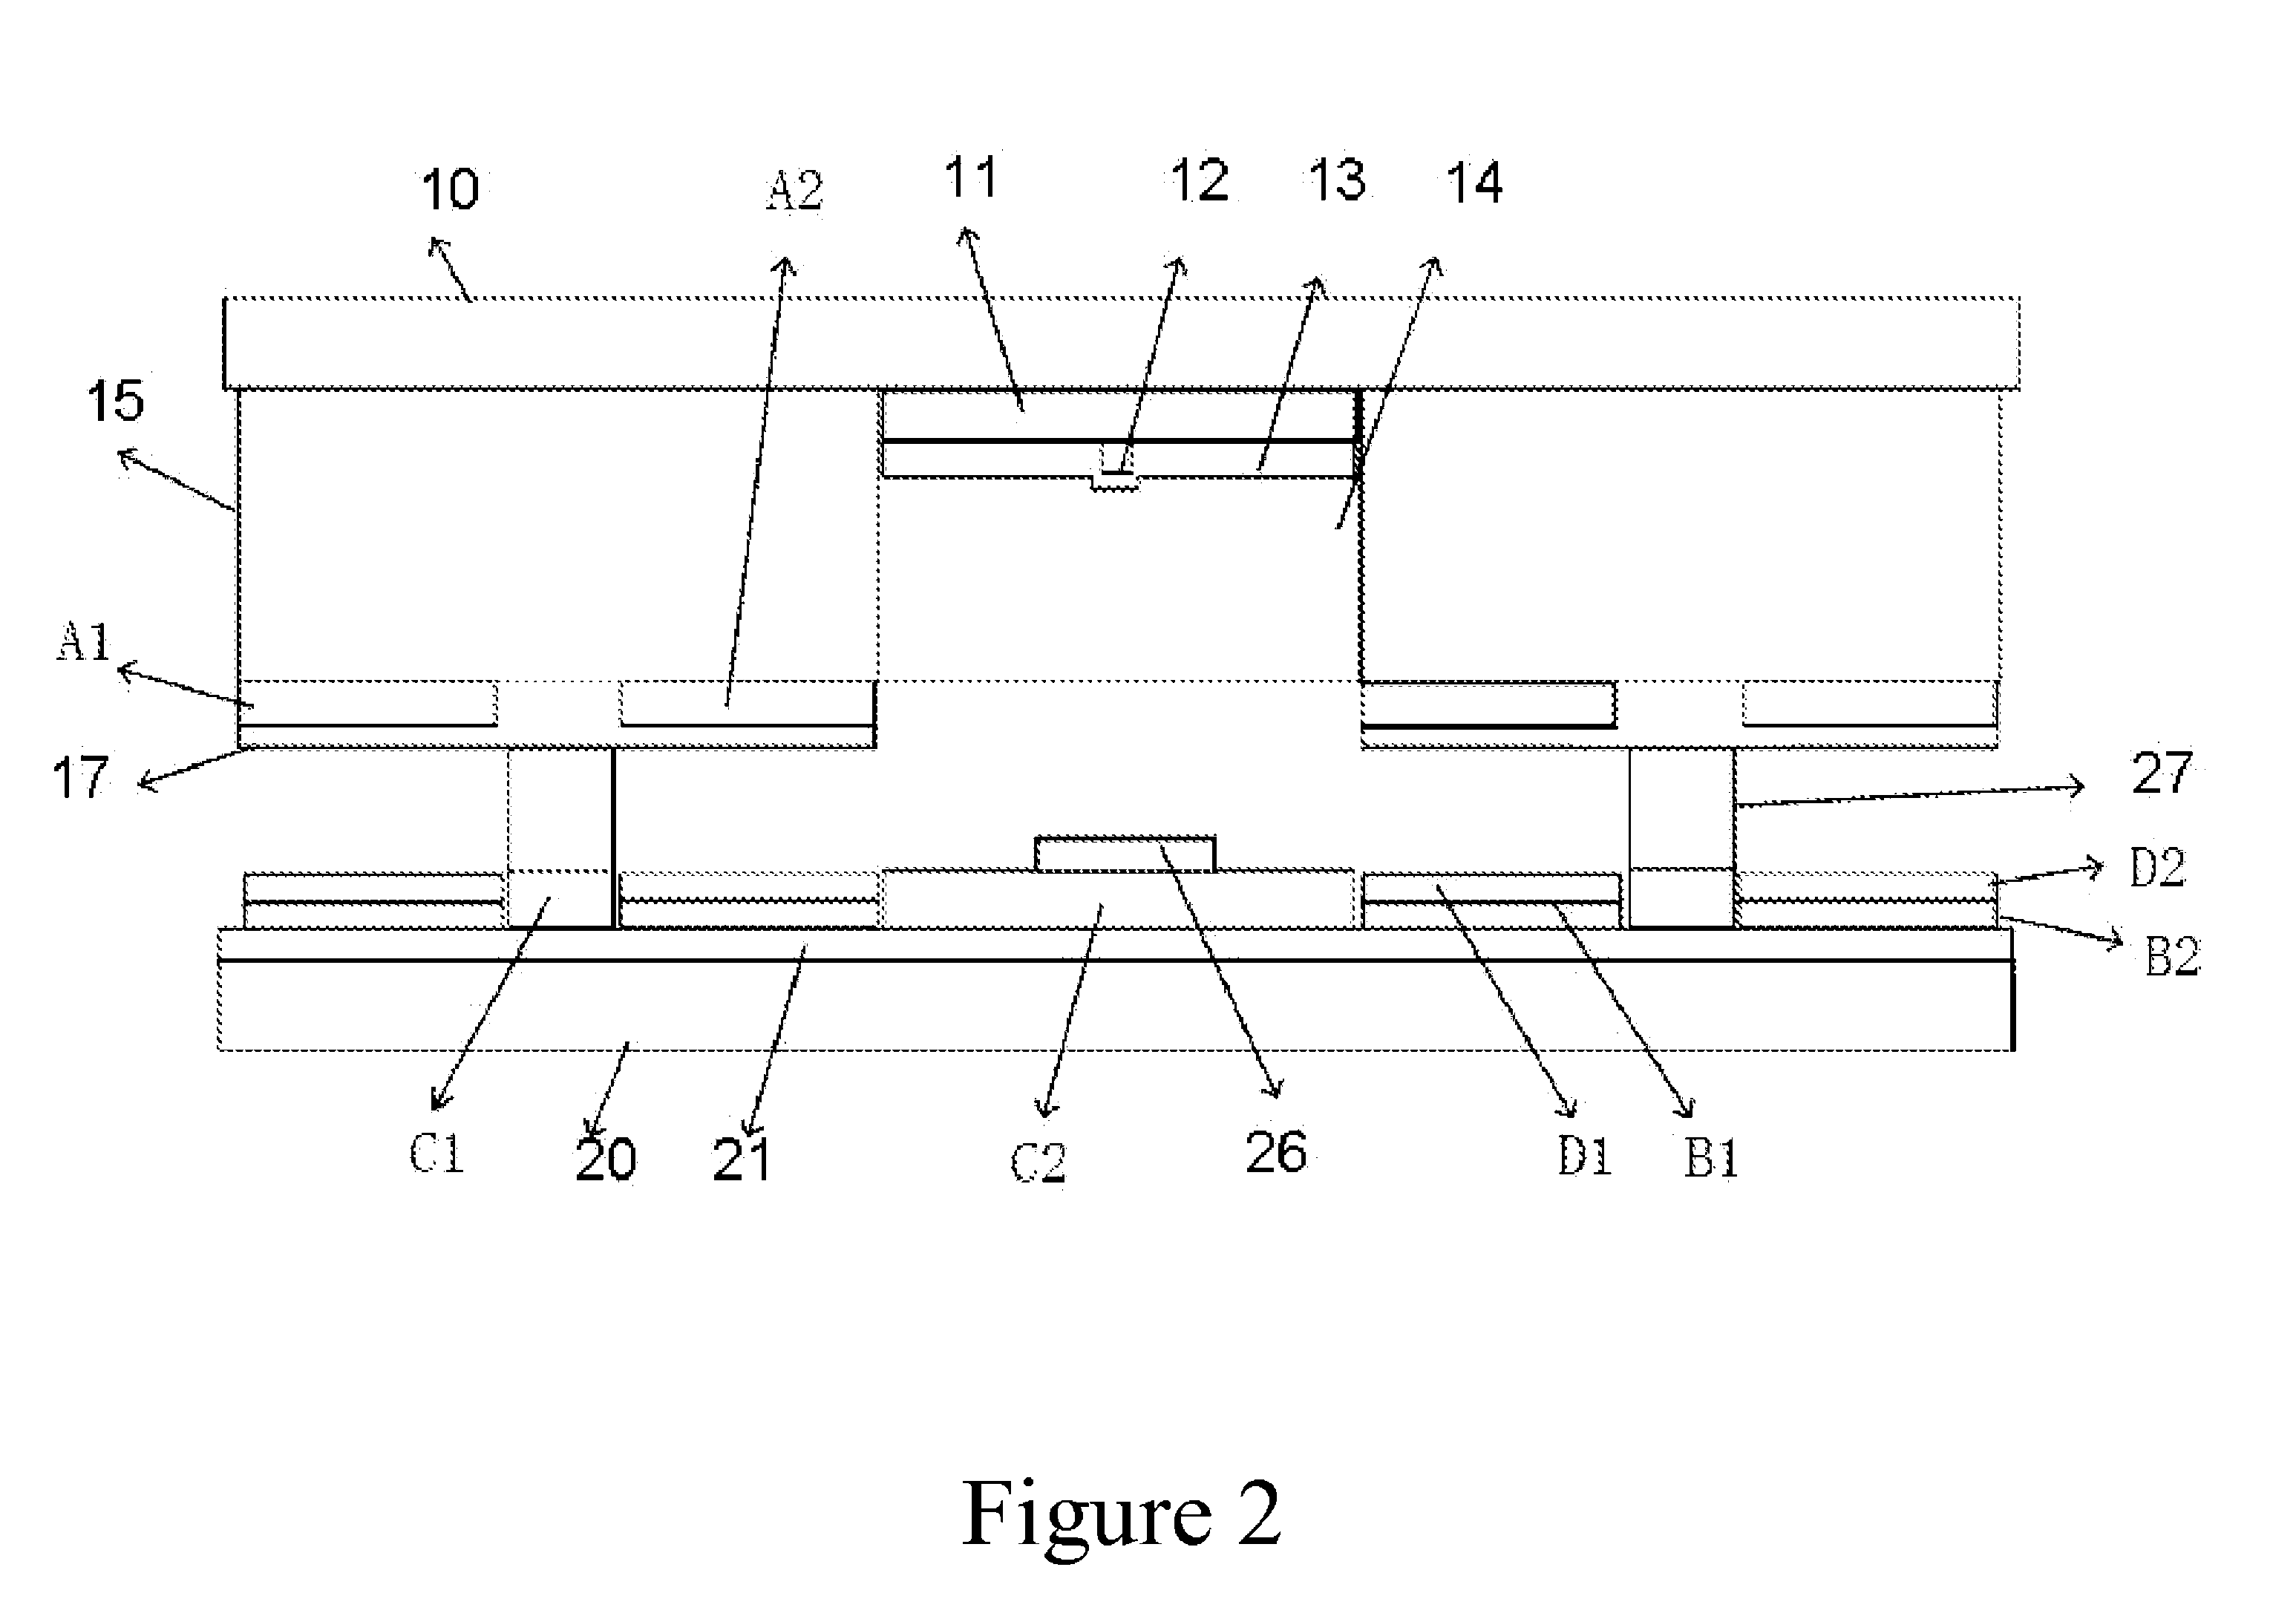 Symmetric quadrupole structured field emission display without spacer